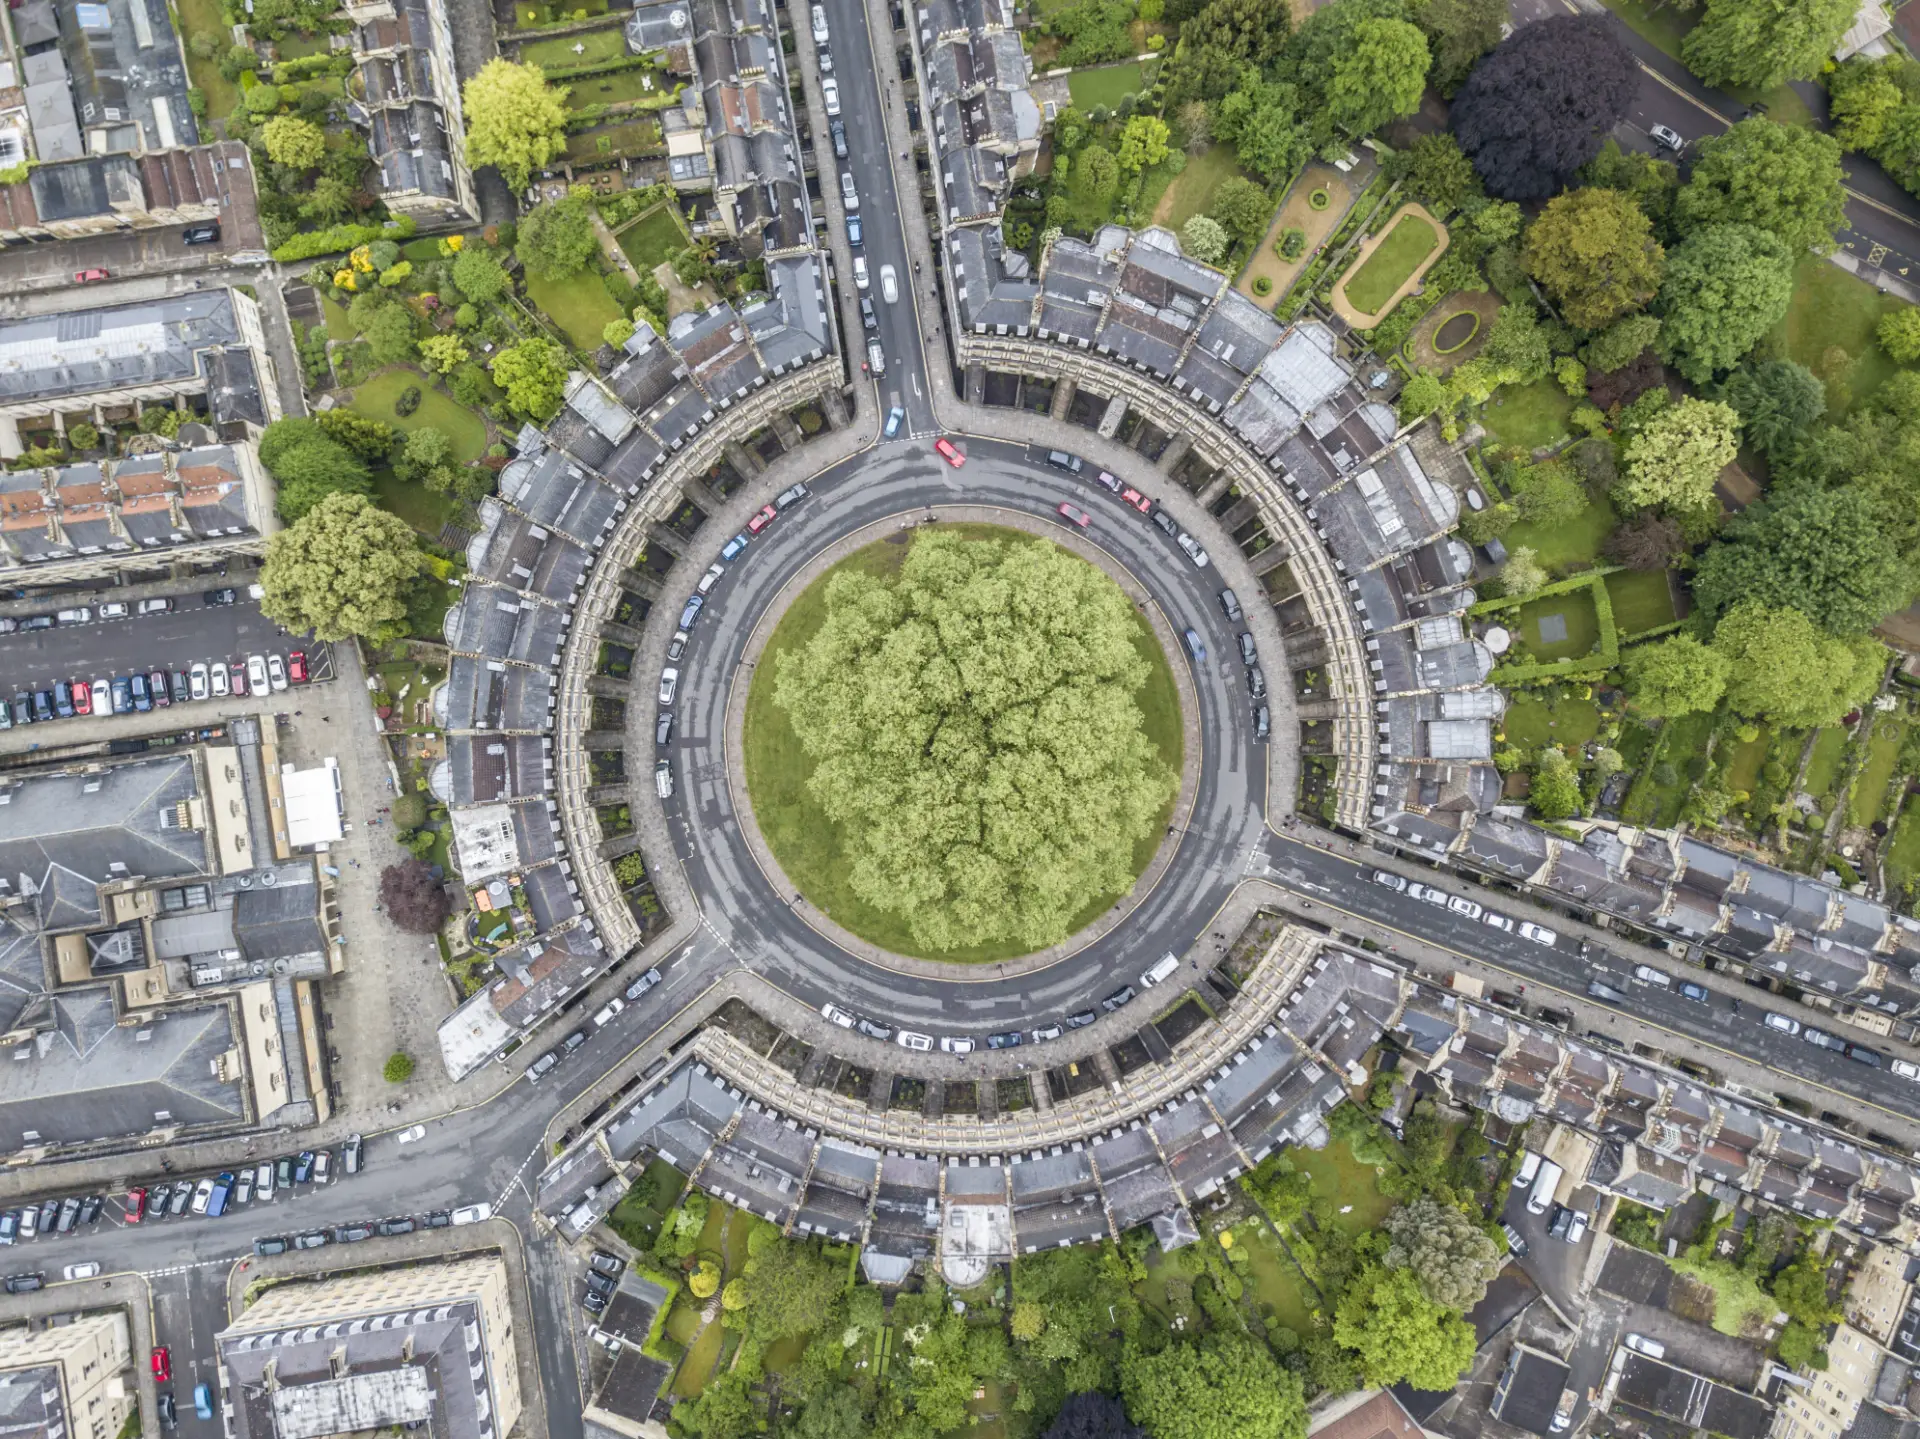 Aerial view of a circular road with cars, surrounded by buildings and greenery, resembling a roundabout, in an urban environment.